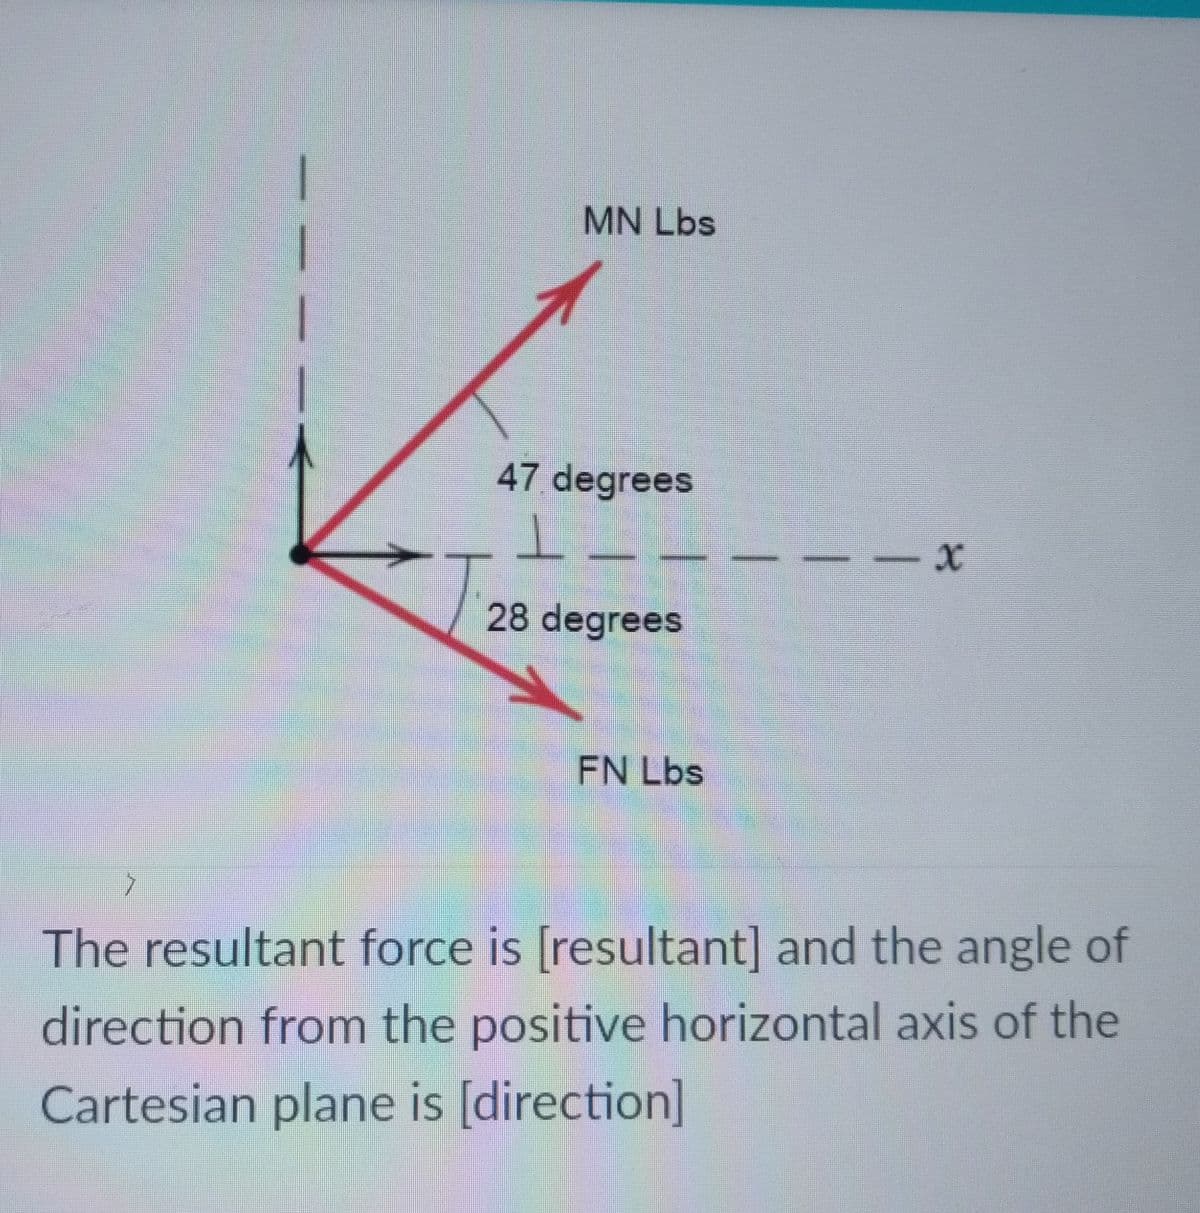 MN Lbs
47 degrees
28 degrees
FN Lbs
The resultant force is [resultant] and the angle of
direction from the positive horizontal axis of the
Cartesian plane is [direction]
